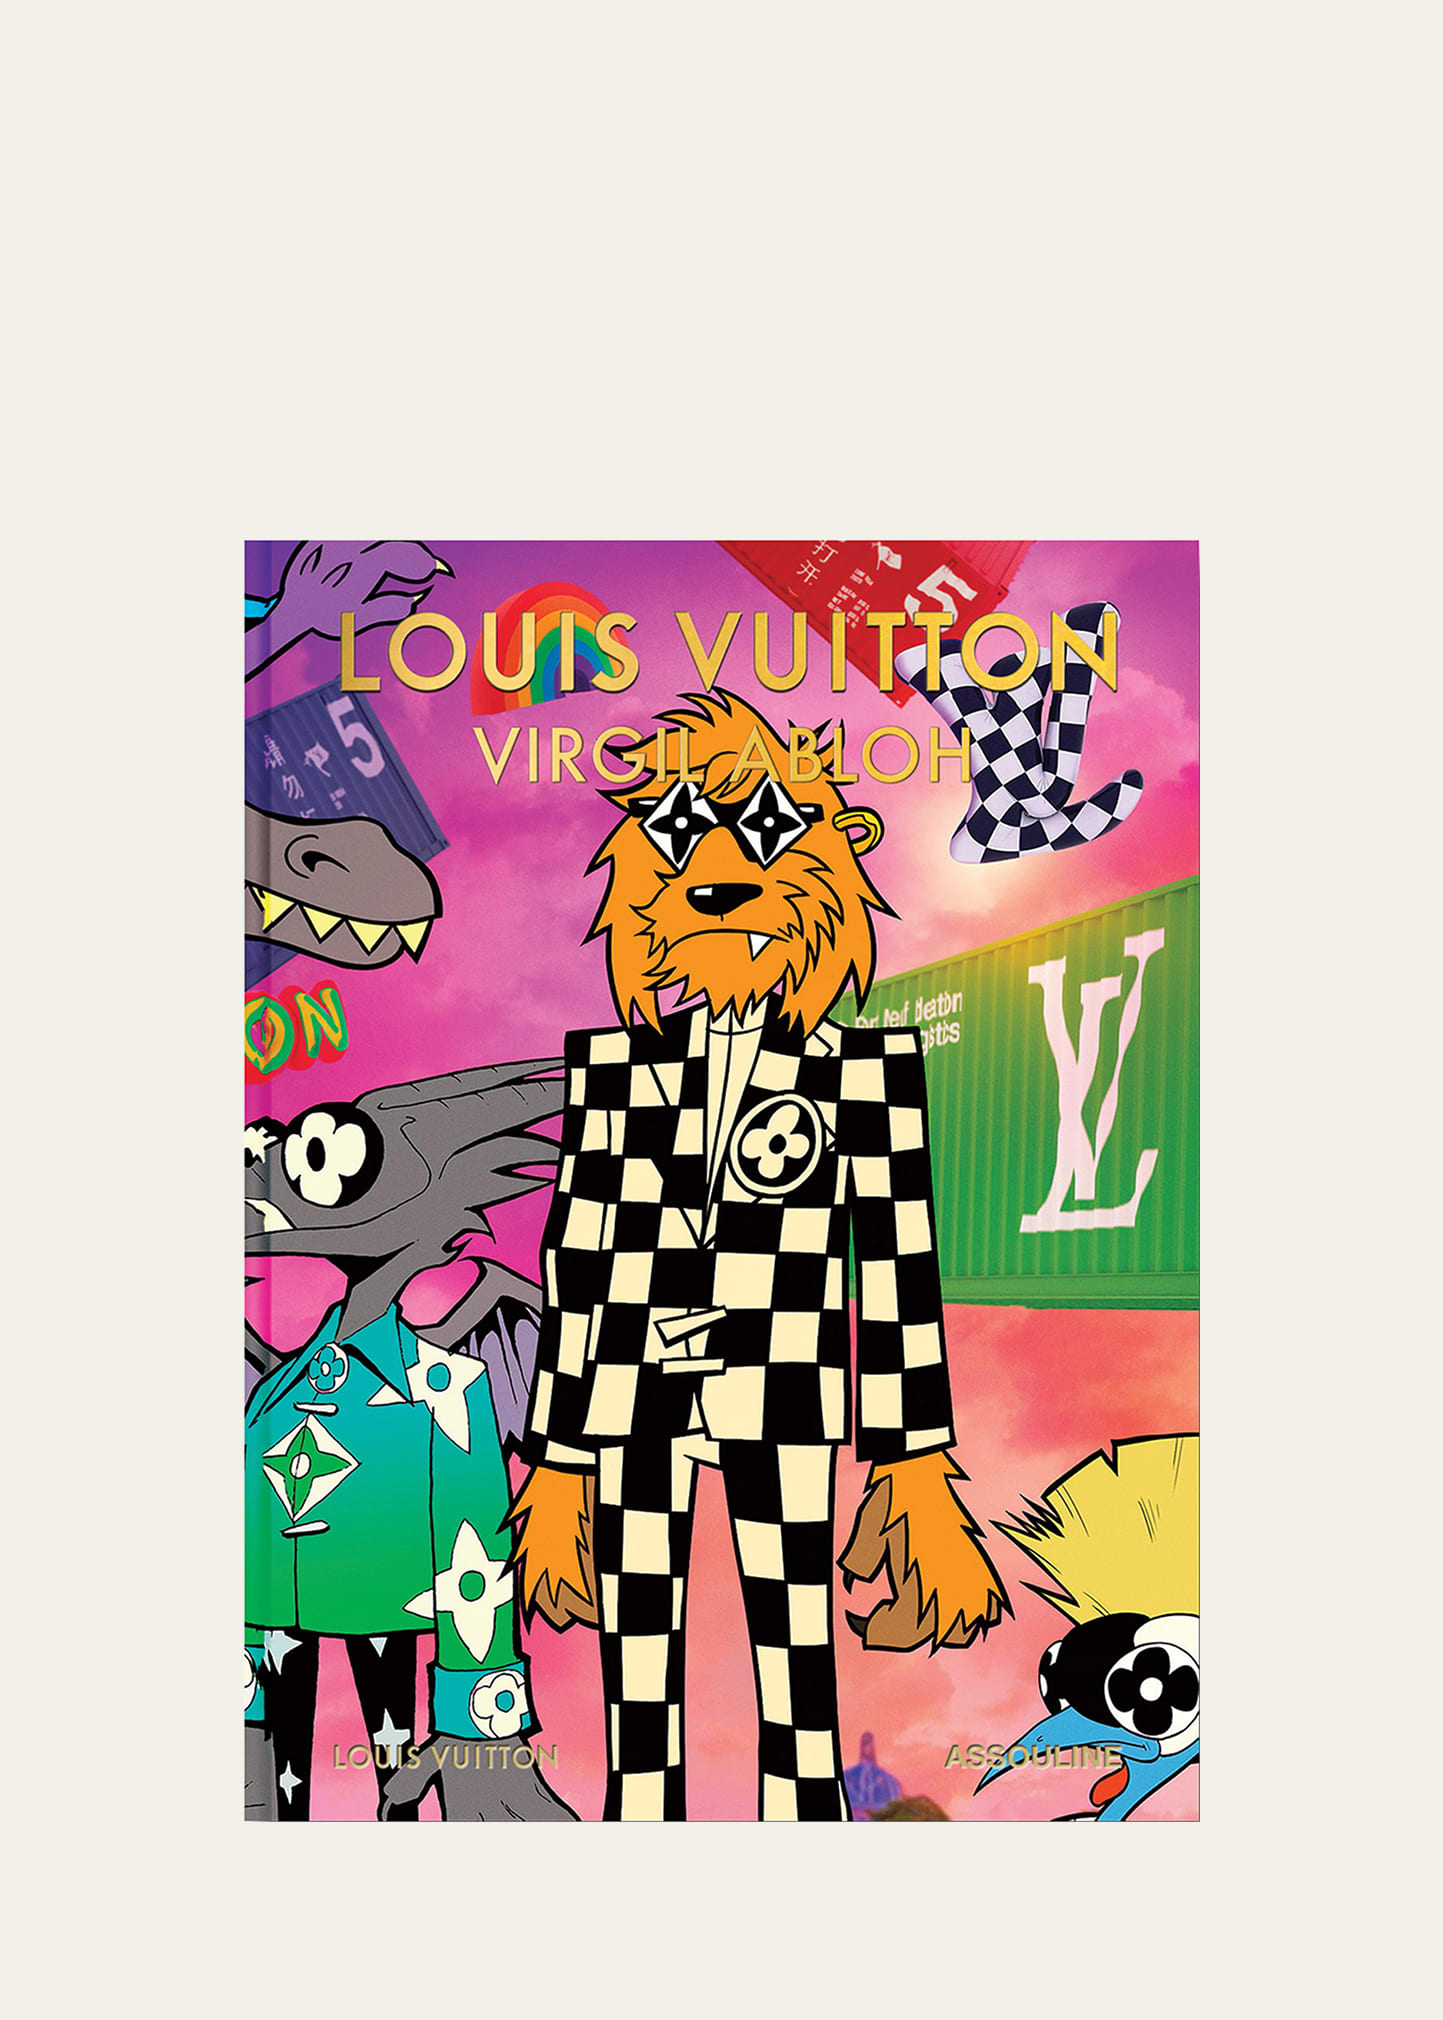 Louis Vuitton: Virgil Abloh Classic Cartoon Cover Book by Anders Christian Madsen